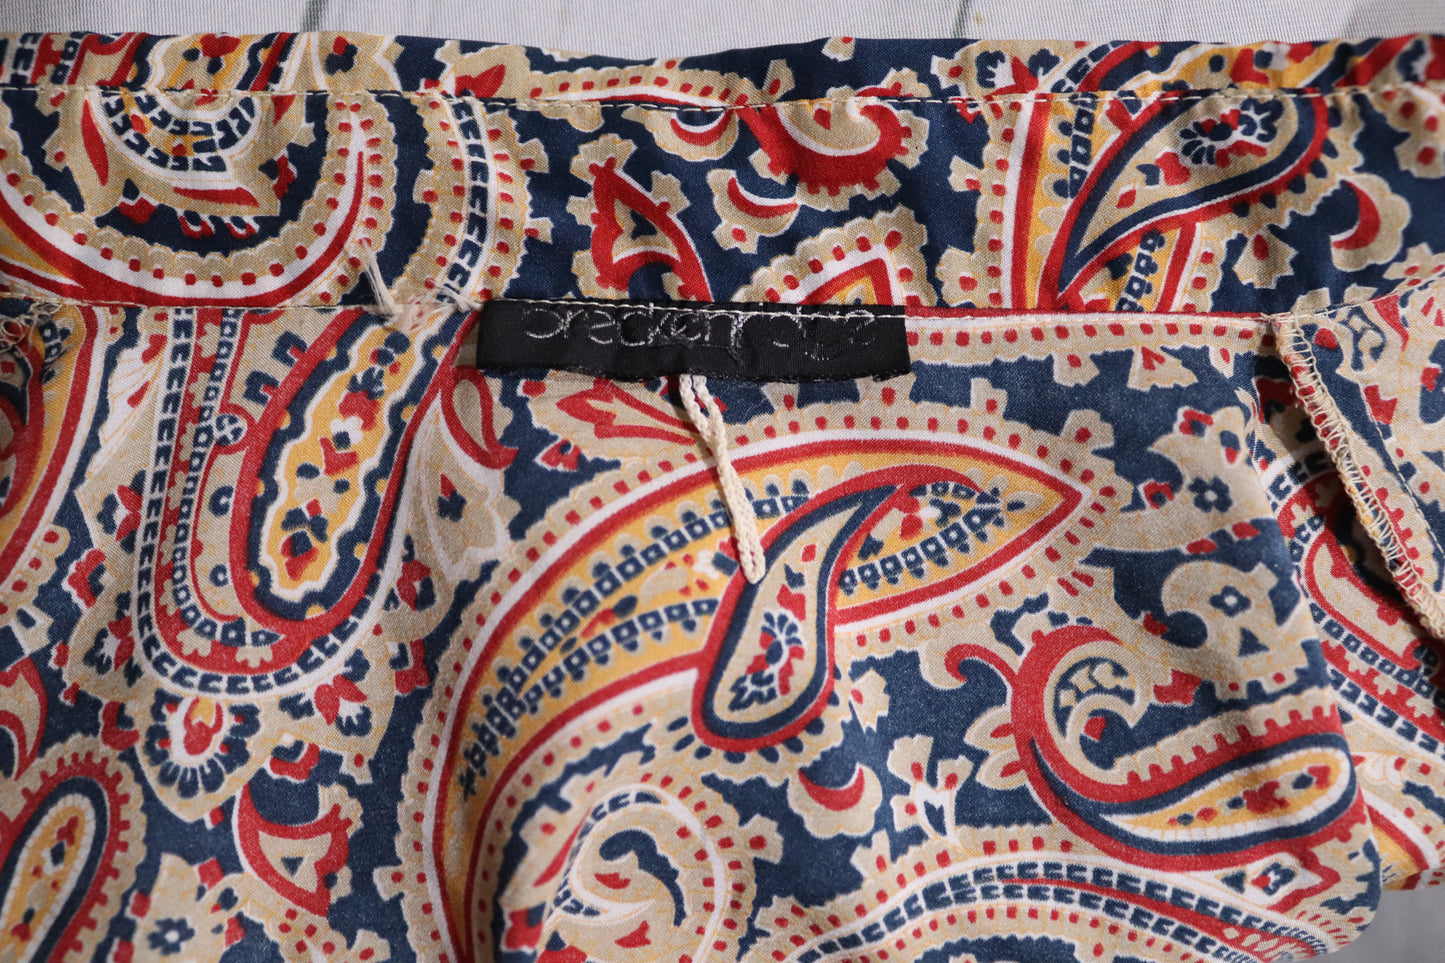 1970's Vintage Blue, Gold and Red Paisley Blouse